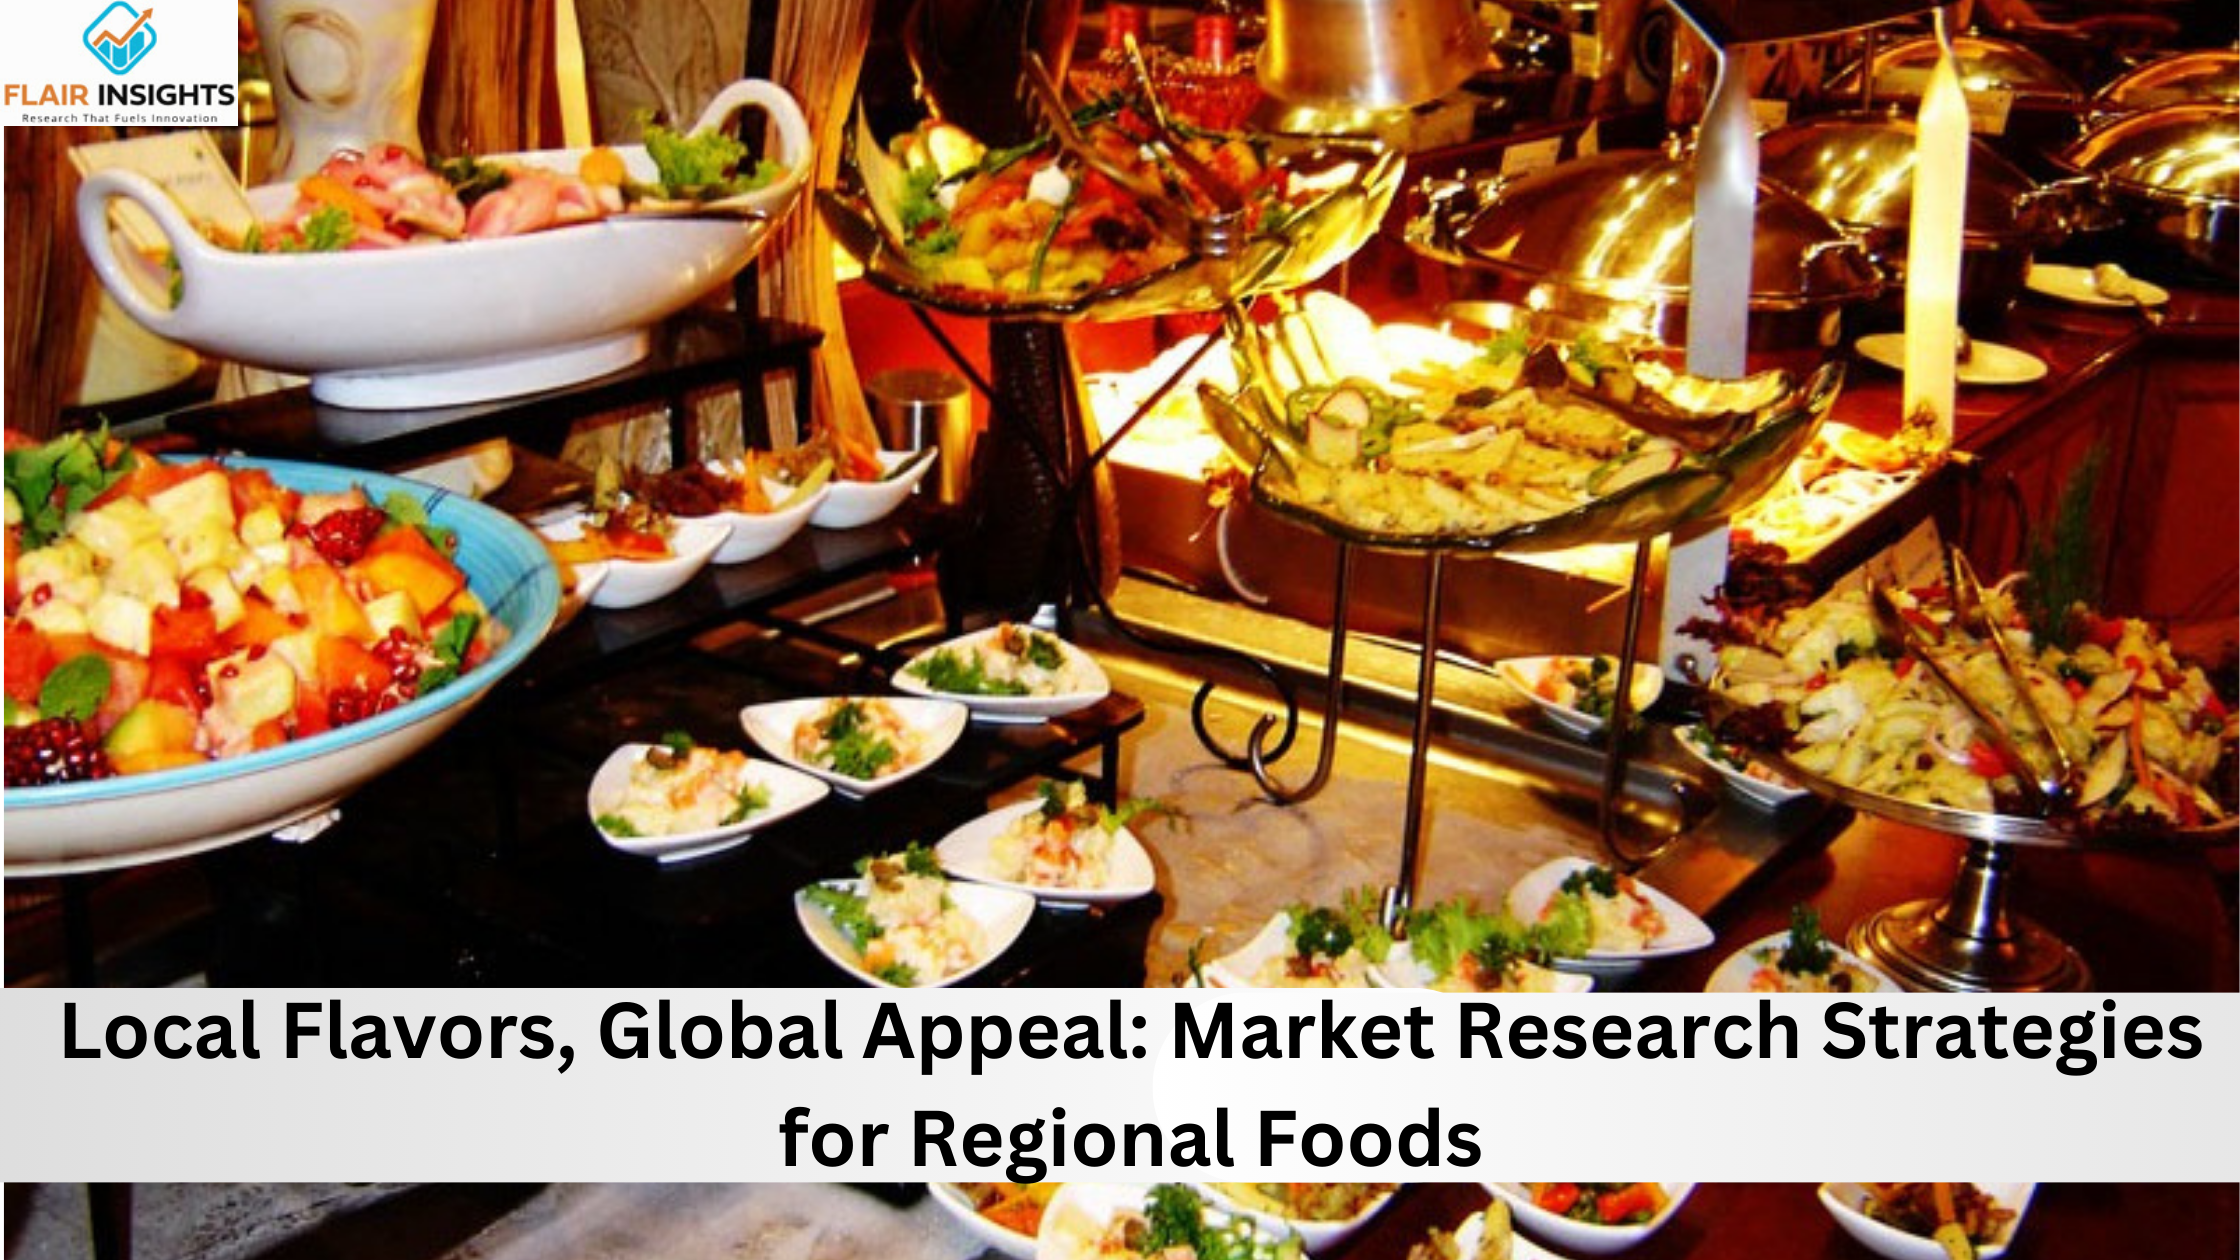 Local Flavors, Global Appeal: Market Research Strategies for Regional Foods